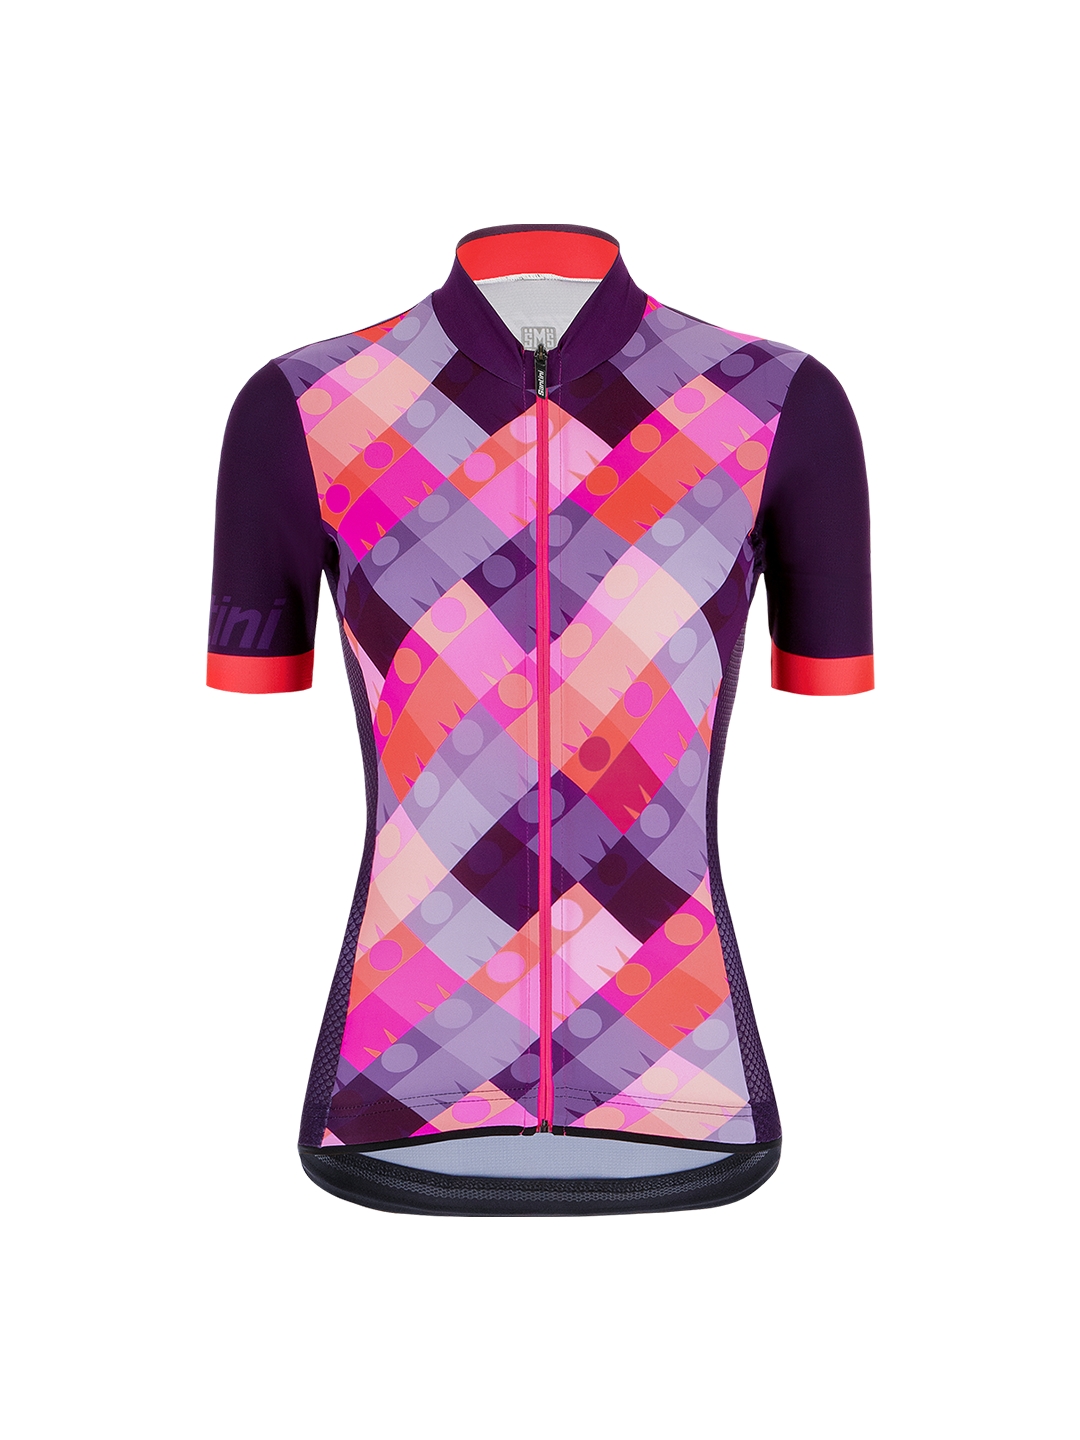 relaxed fit women's cycling jersey